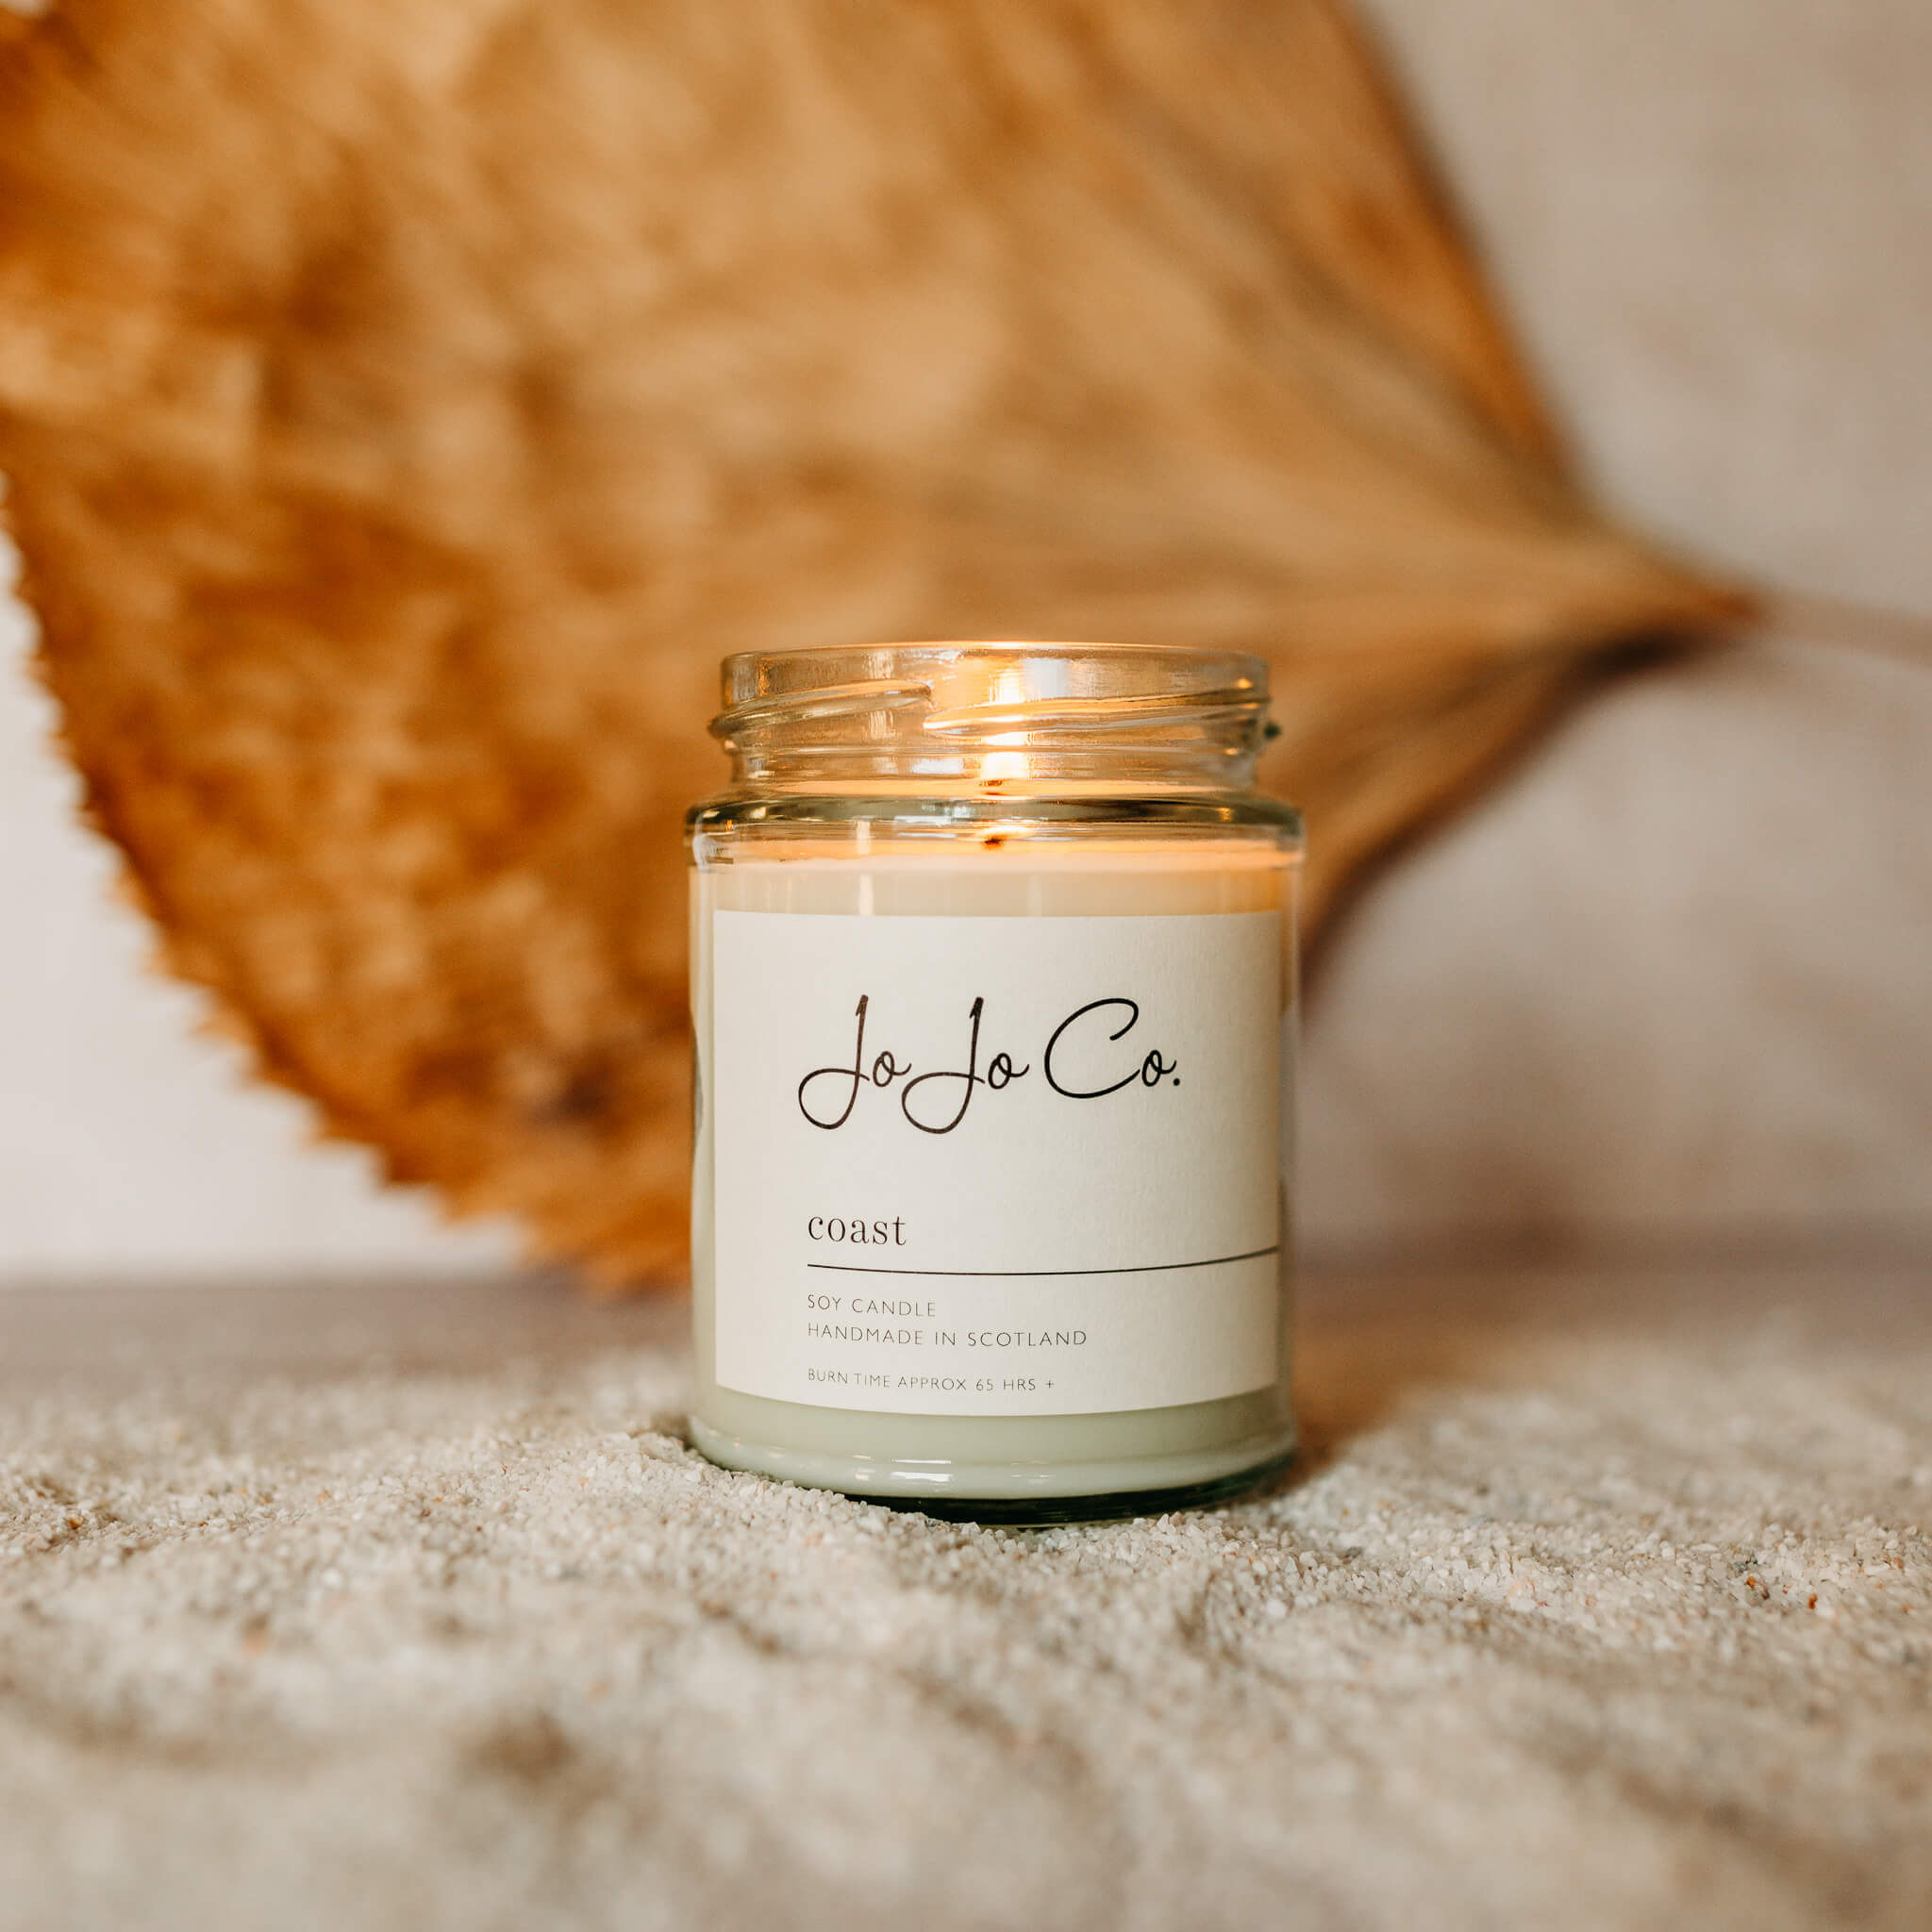 JoJo Co. 65 hour candle with white label and flickering flame. The candle sits on top of sand with a dried leaf in the background.